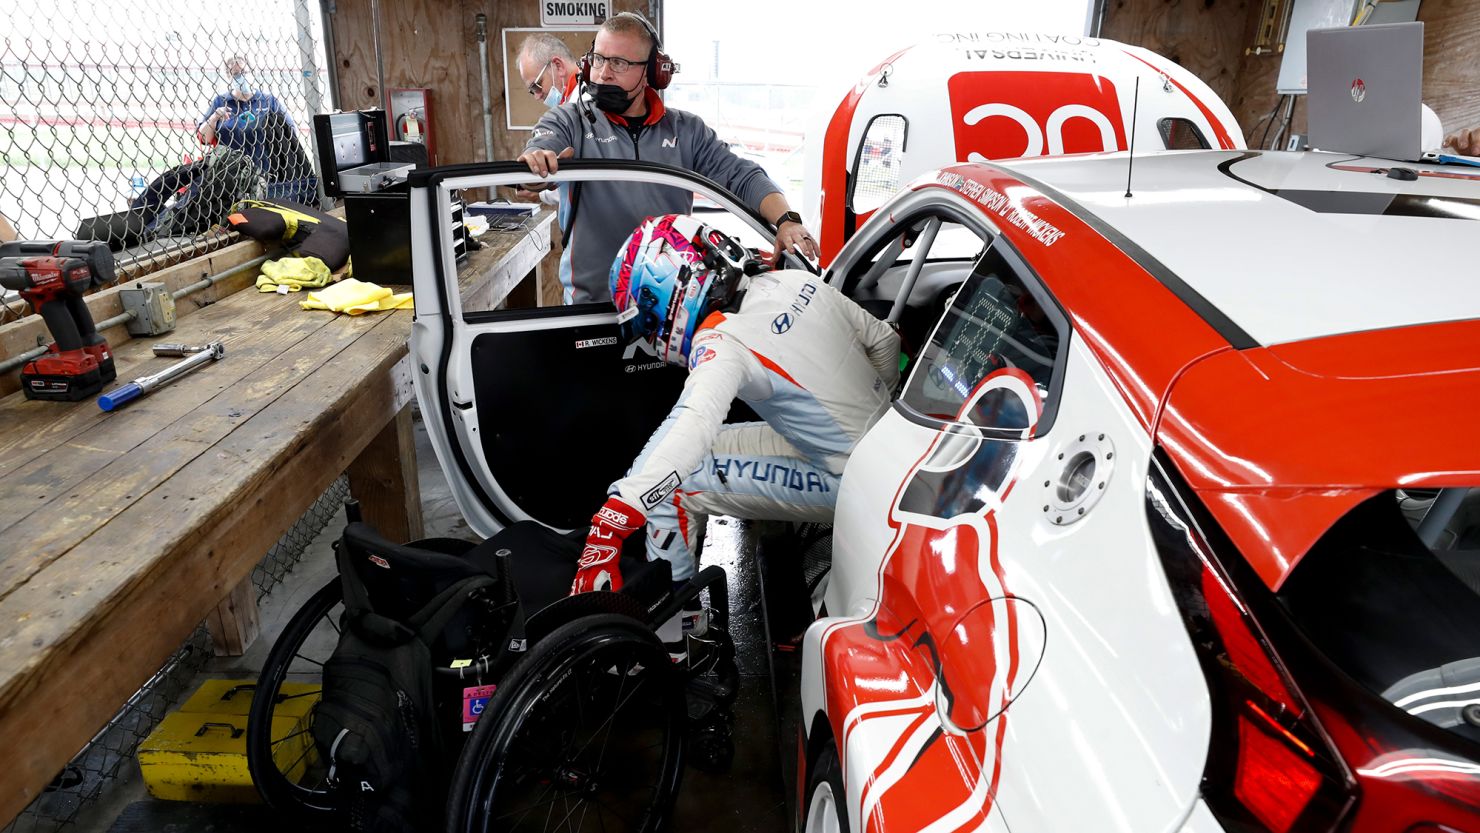 Robert Wickens climbs into a race car for the first time since his 2018 accident.